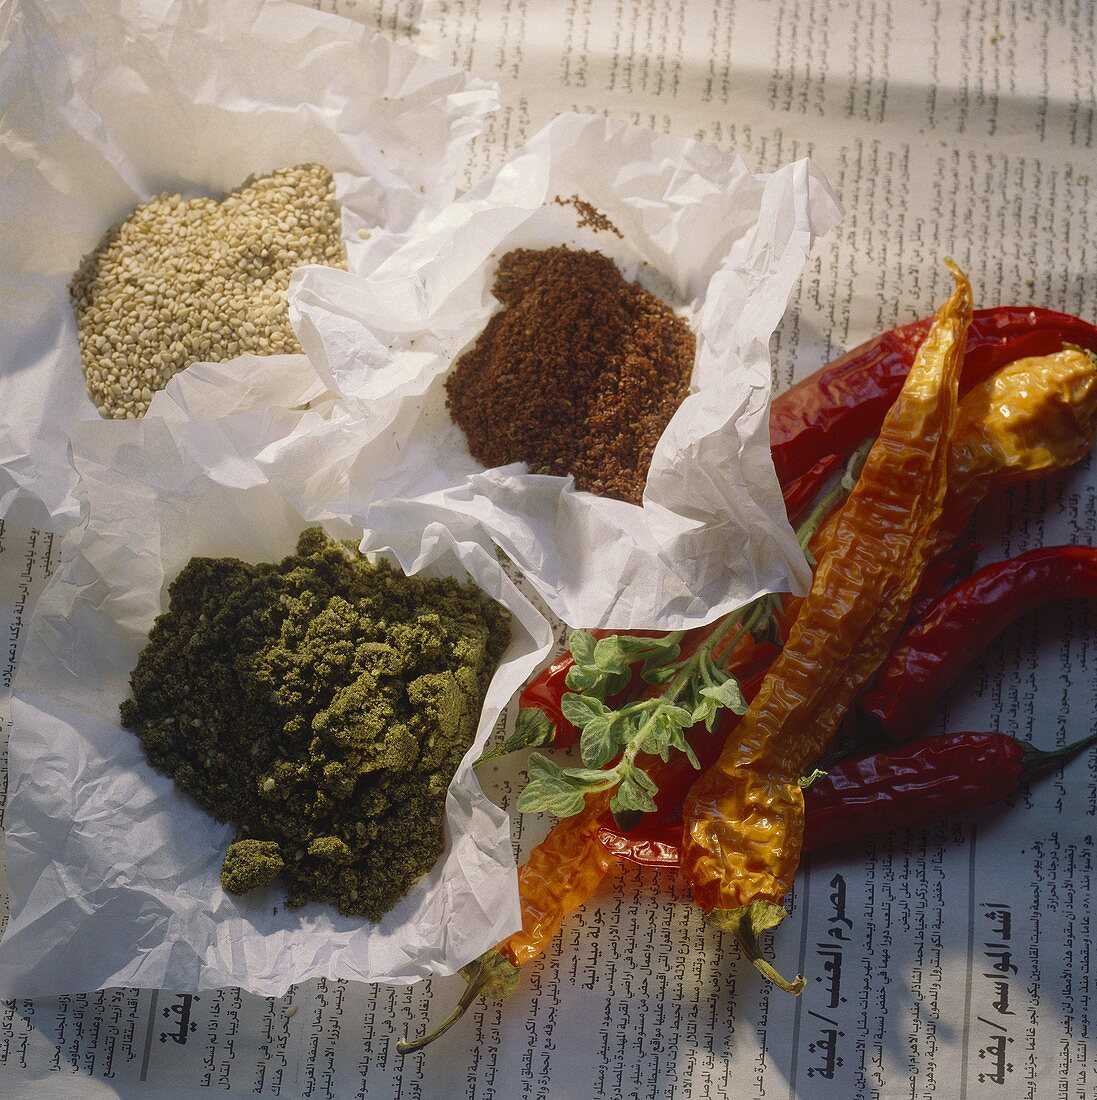 Middle Eastern spice mixtures